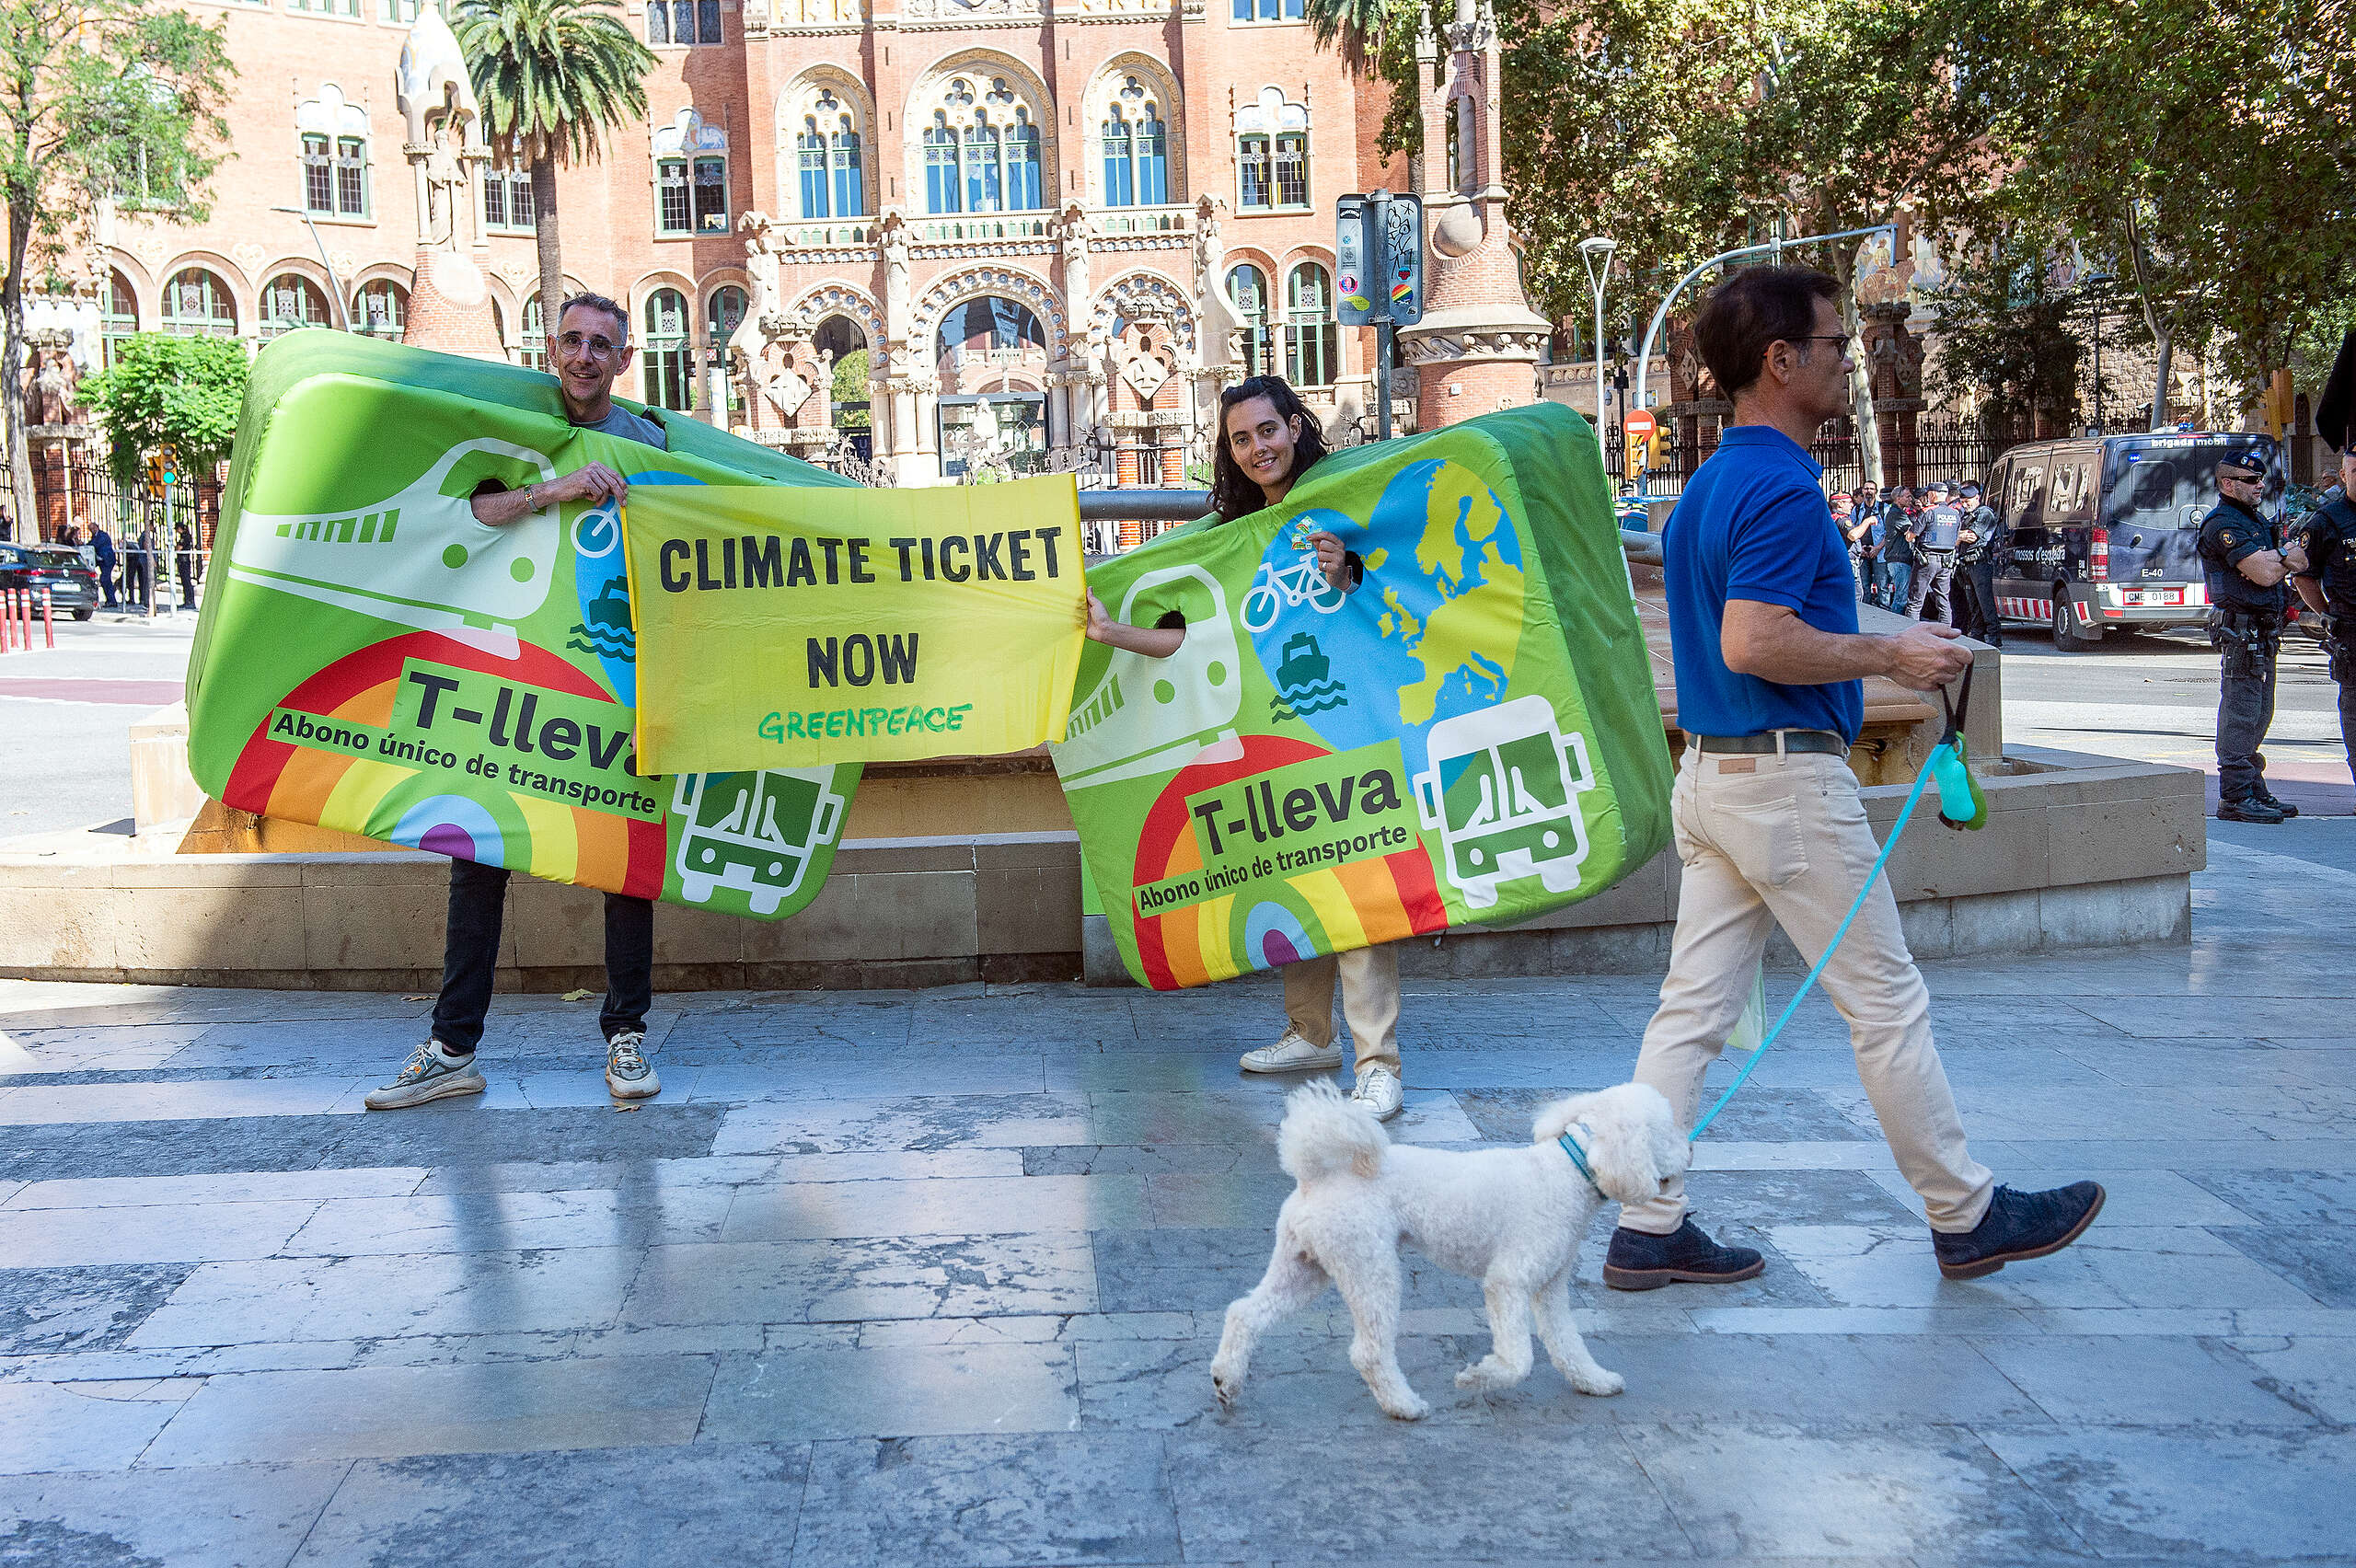 Greenpeace Spain activists hold a banner to European transport ministers meeting in Barcelona saying "Climate ticket now" to call for a single season ticket for the whole country.